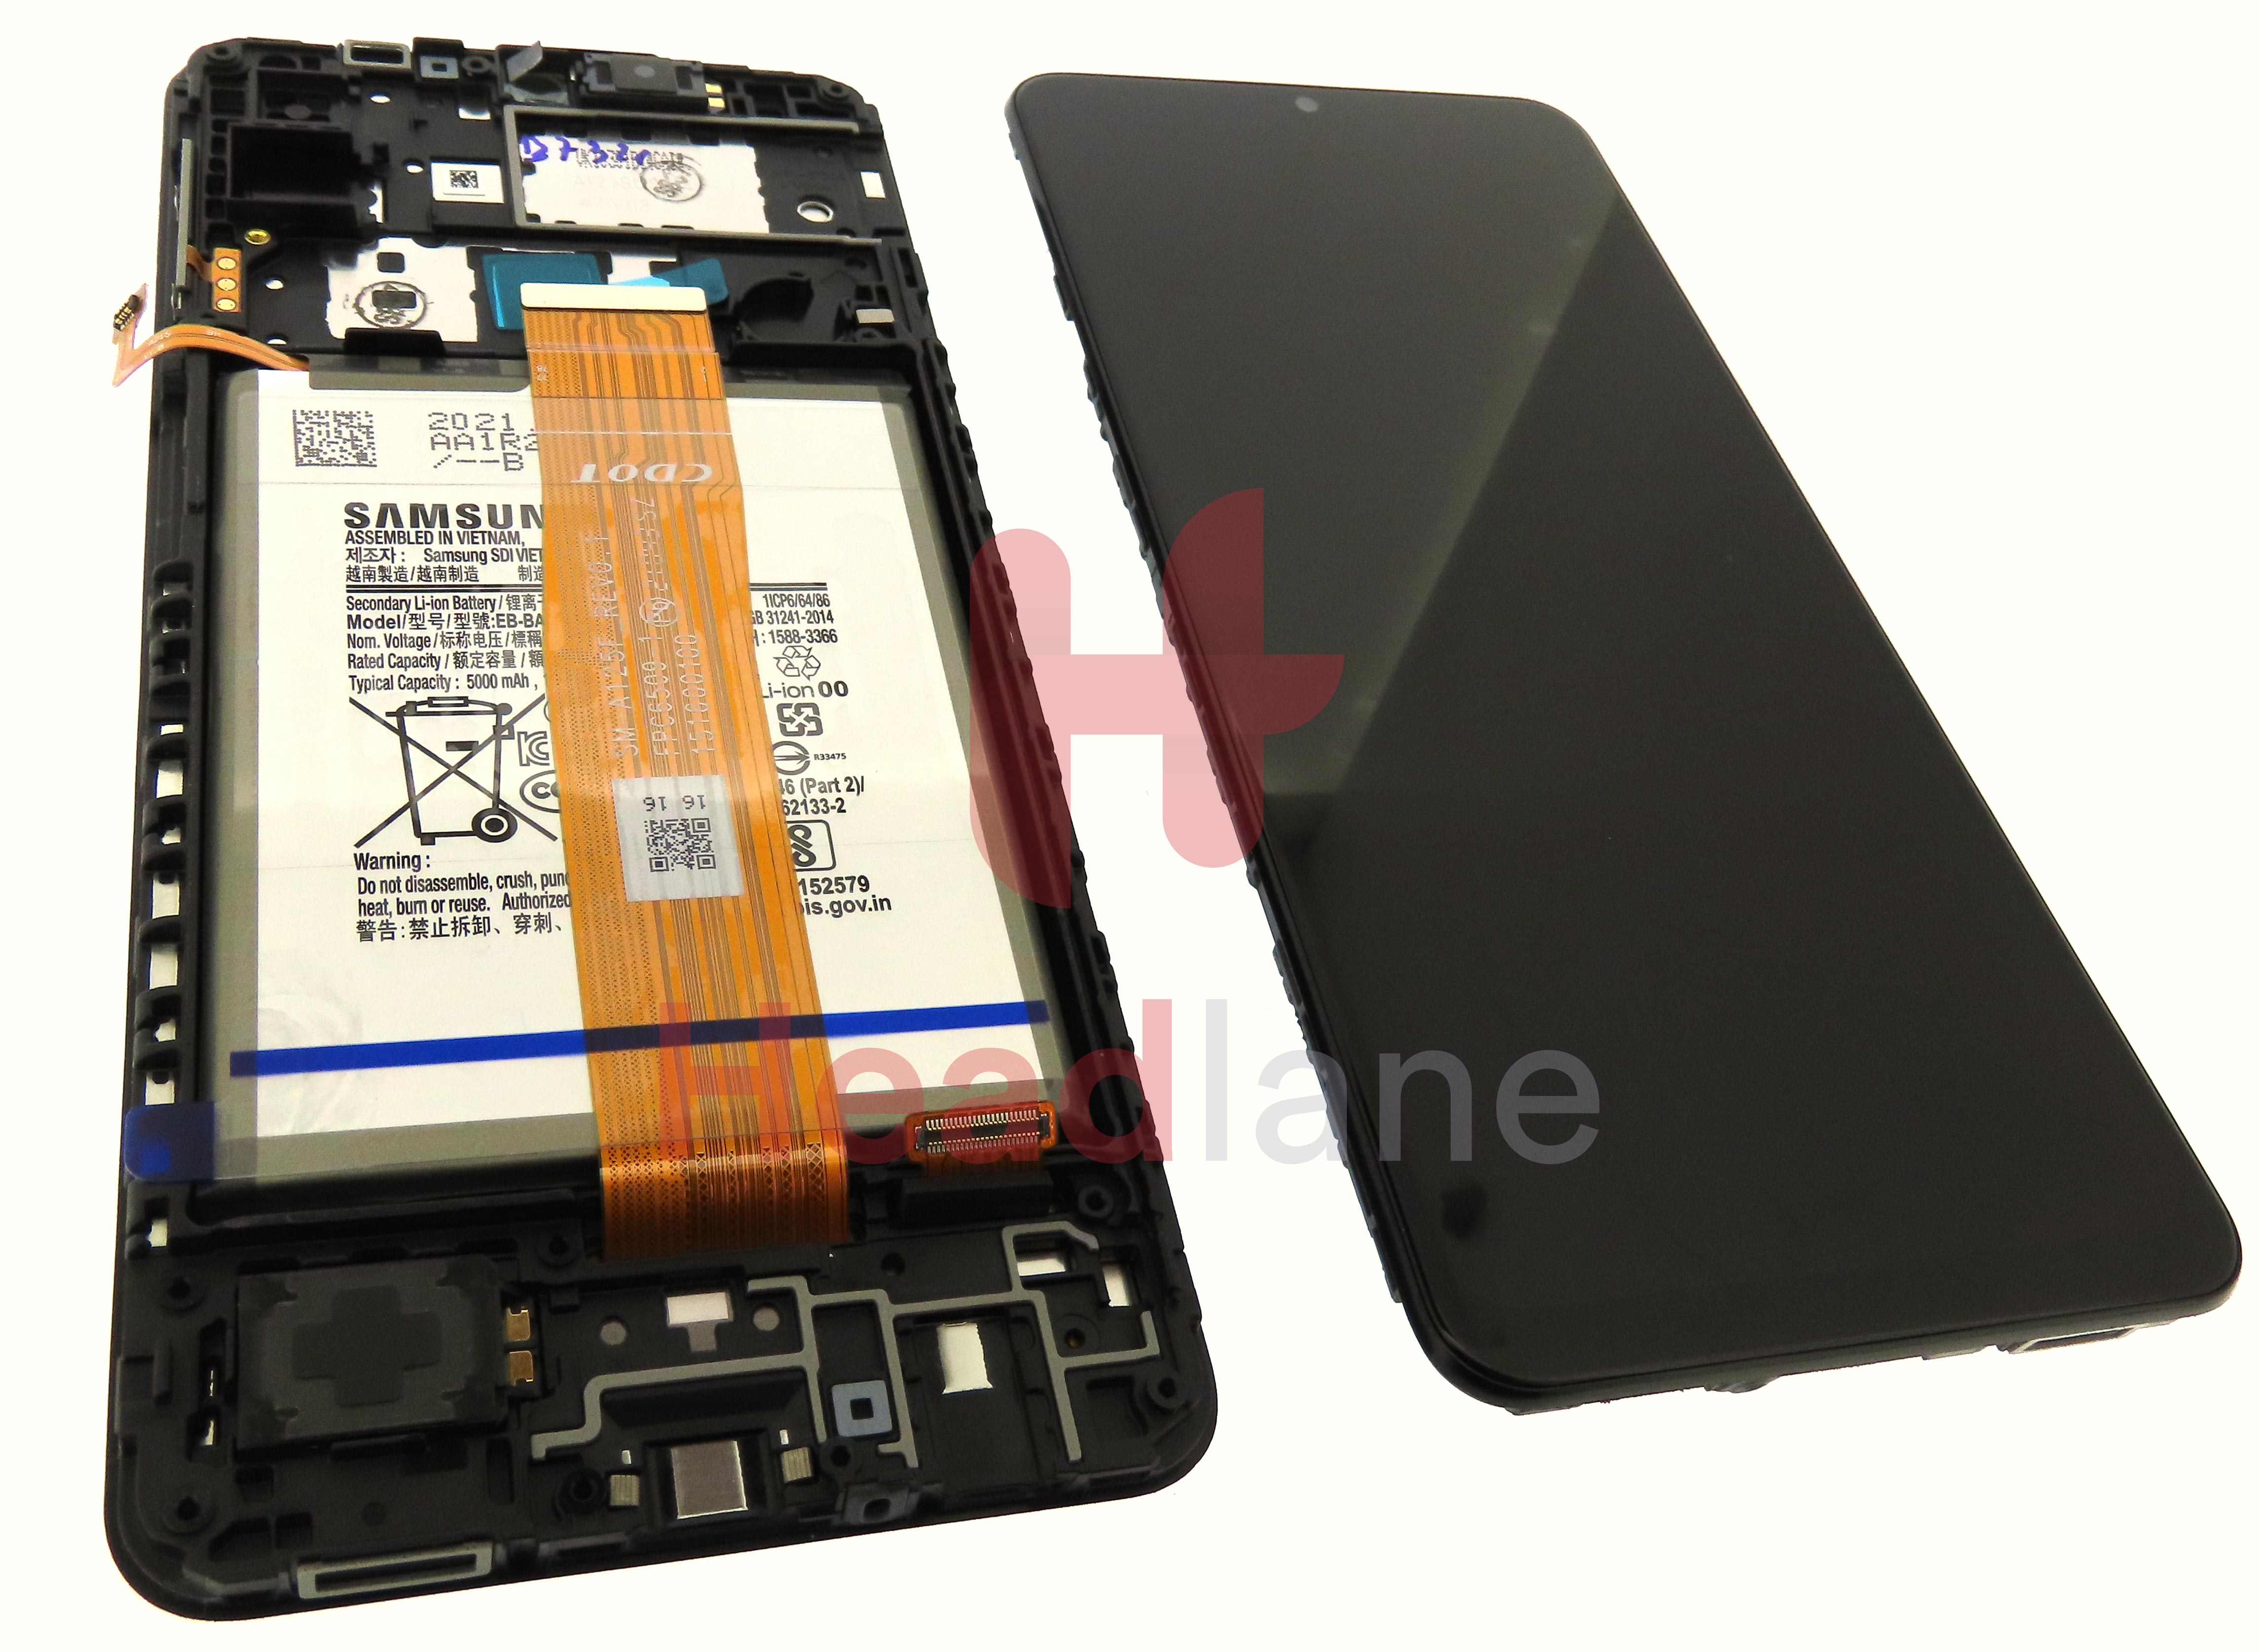 Samsung SM-A125 Galaxy A12 LCD Display / Screen + Touch + Battery